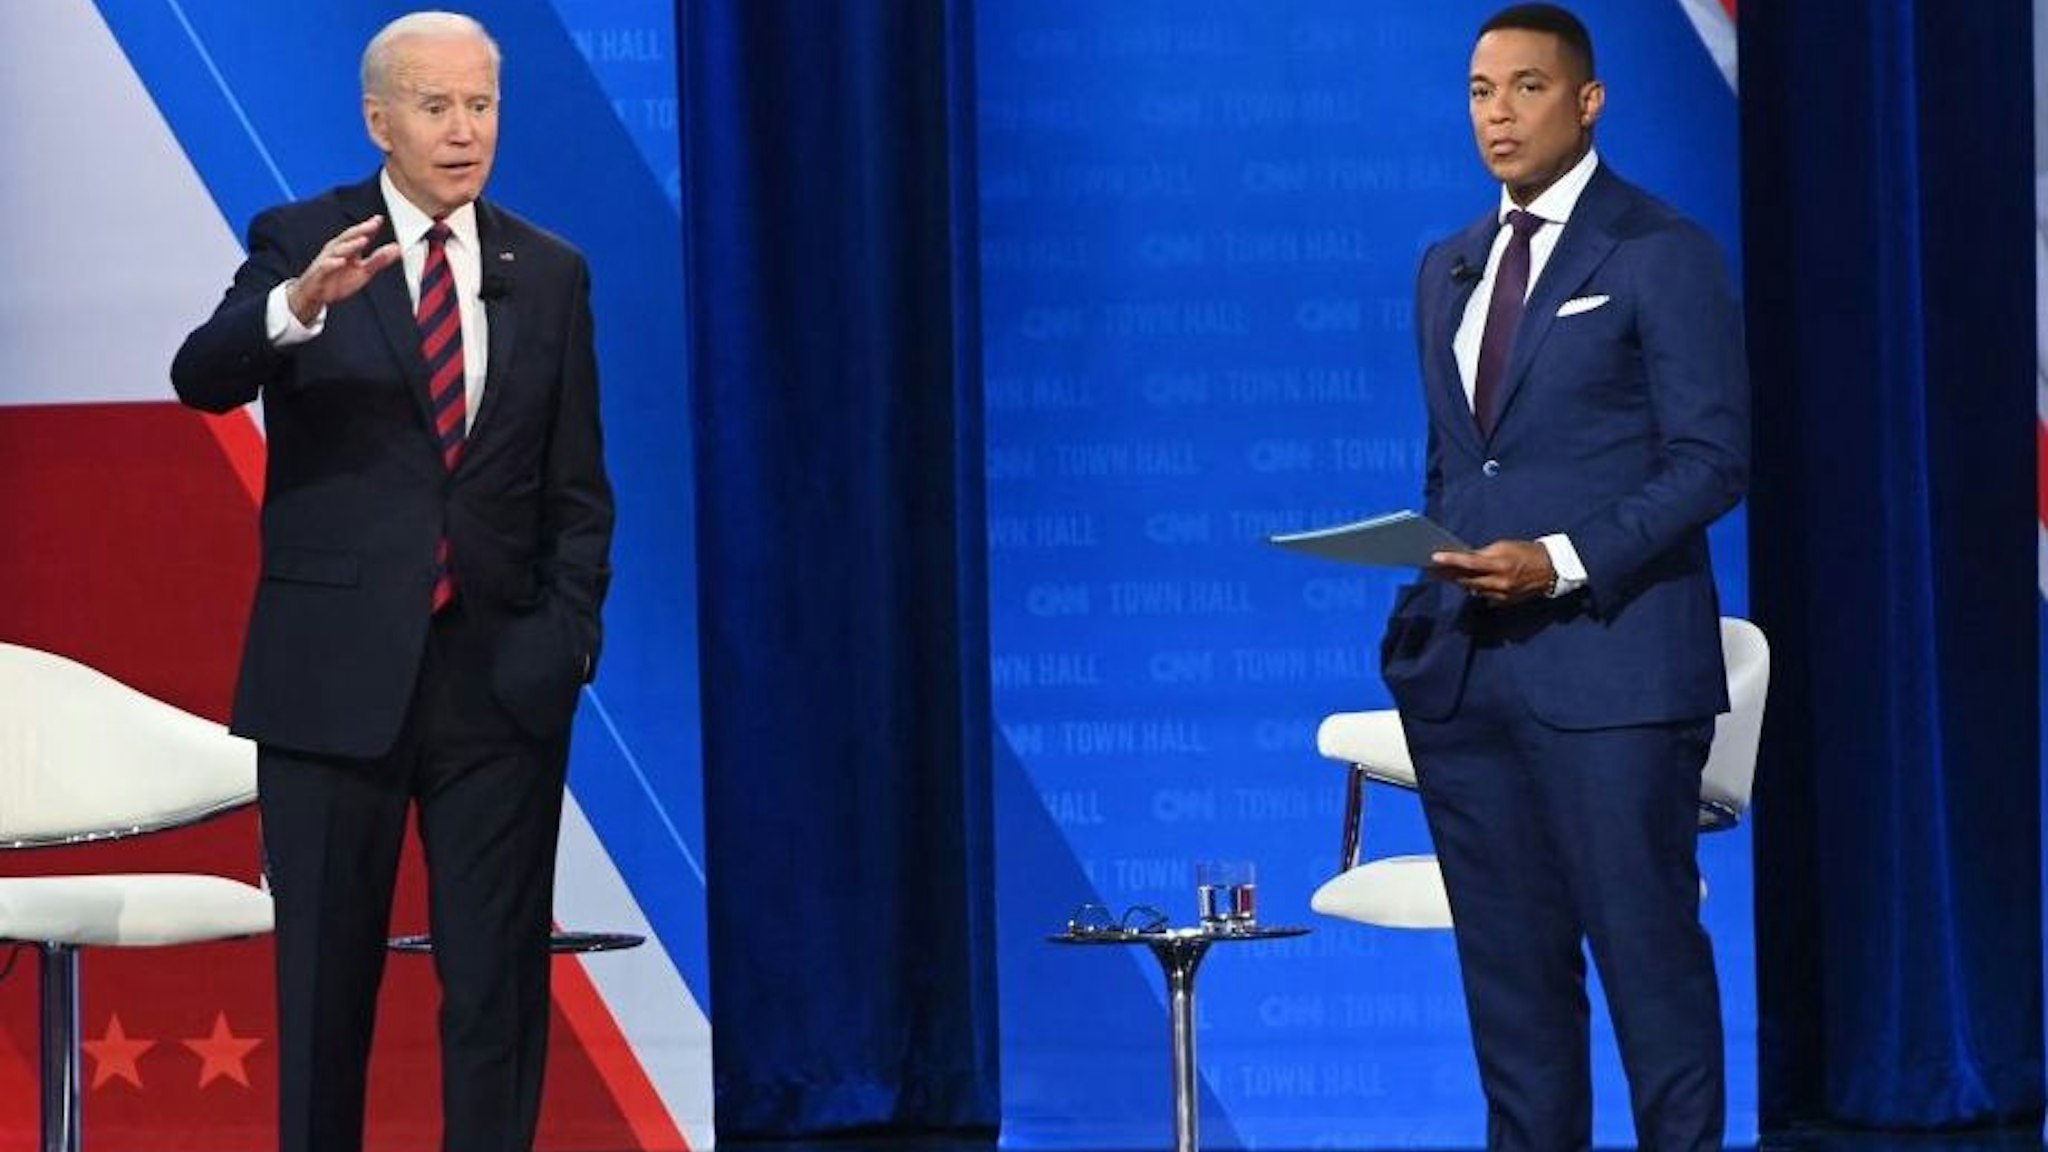 US President Joe Biden participates in a CNN Town Hall hosted by Don Lemon (R) at Mount St. Joseph University in Cincinnati, Ohio, July 21, 2021. (Photo by SAUL LOEB / AFP) (Photo by SAUL LOEB/AFP via Getty Images)